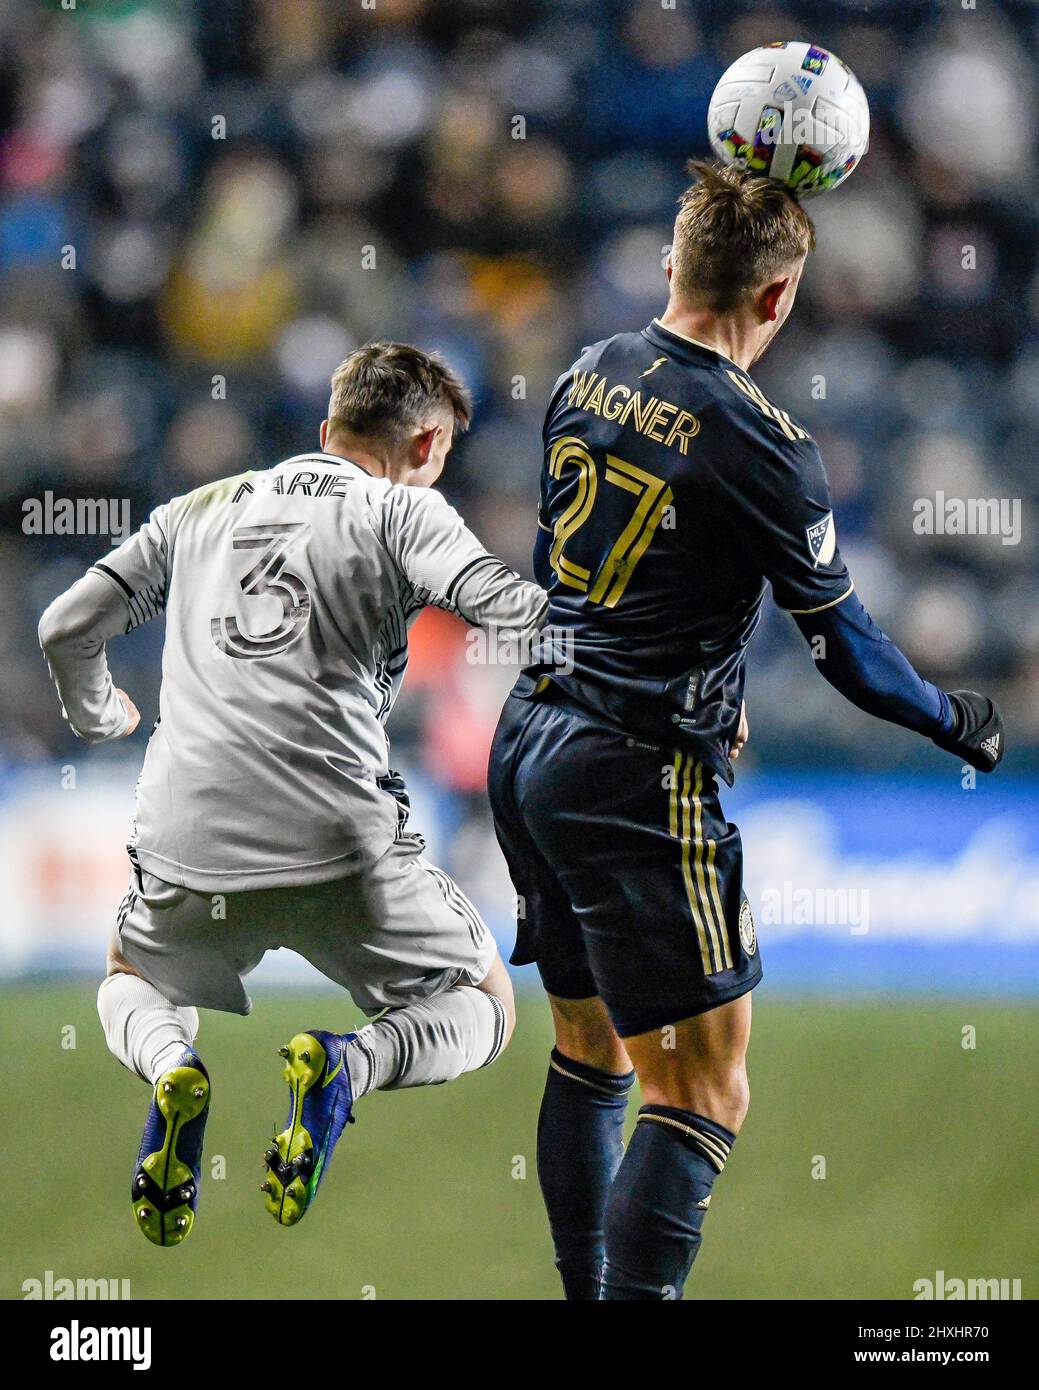 Chester, PA USA, 12 March 2022 - Defender Kai Wagner wins a header as the Philadelphia Union defeat the San Jose Earthquakes 2 - 0 during a Major League Soccer MLS professional soccer game Stock Photo